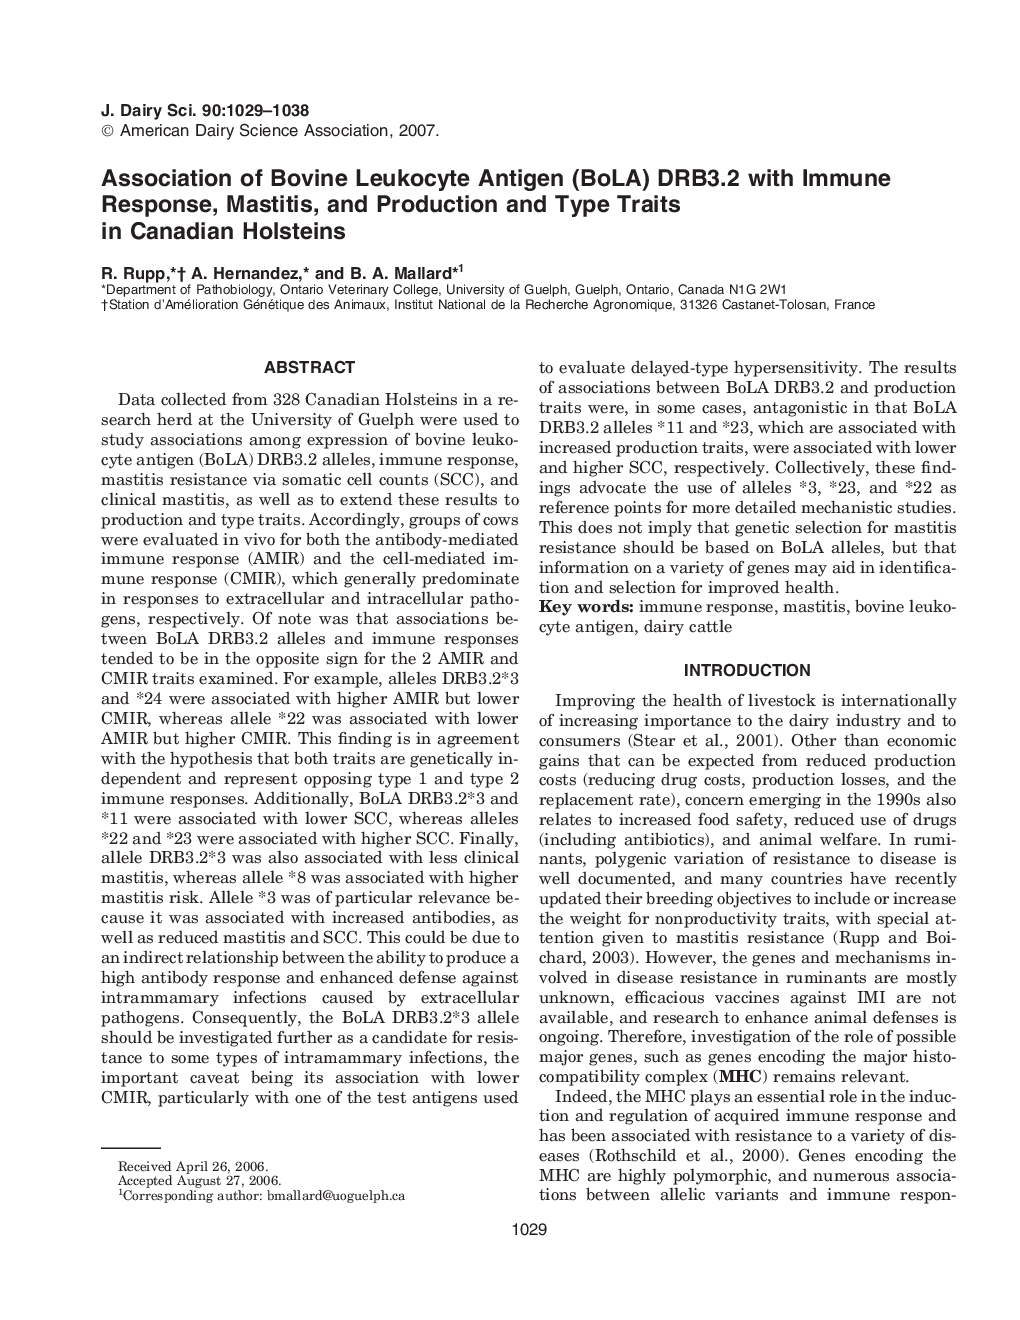 Association of Bovine Leukocyte Antigen (BoLA) DRB3.2 with Immune Response, Mastitis, and Production and Type Traits in Canadian Holsteins